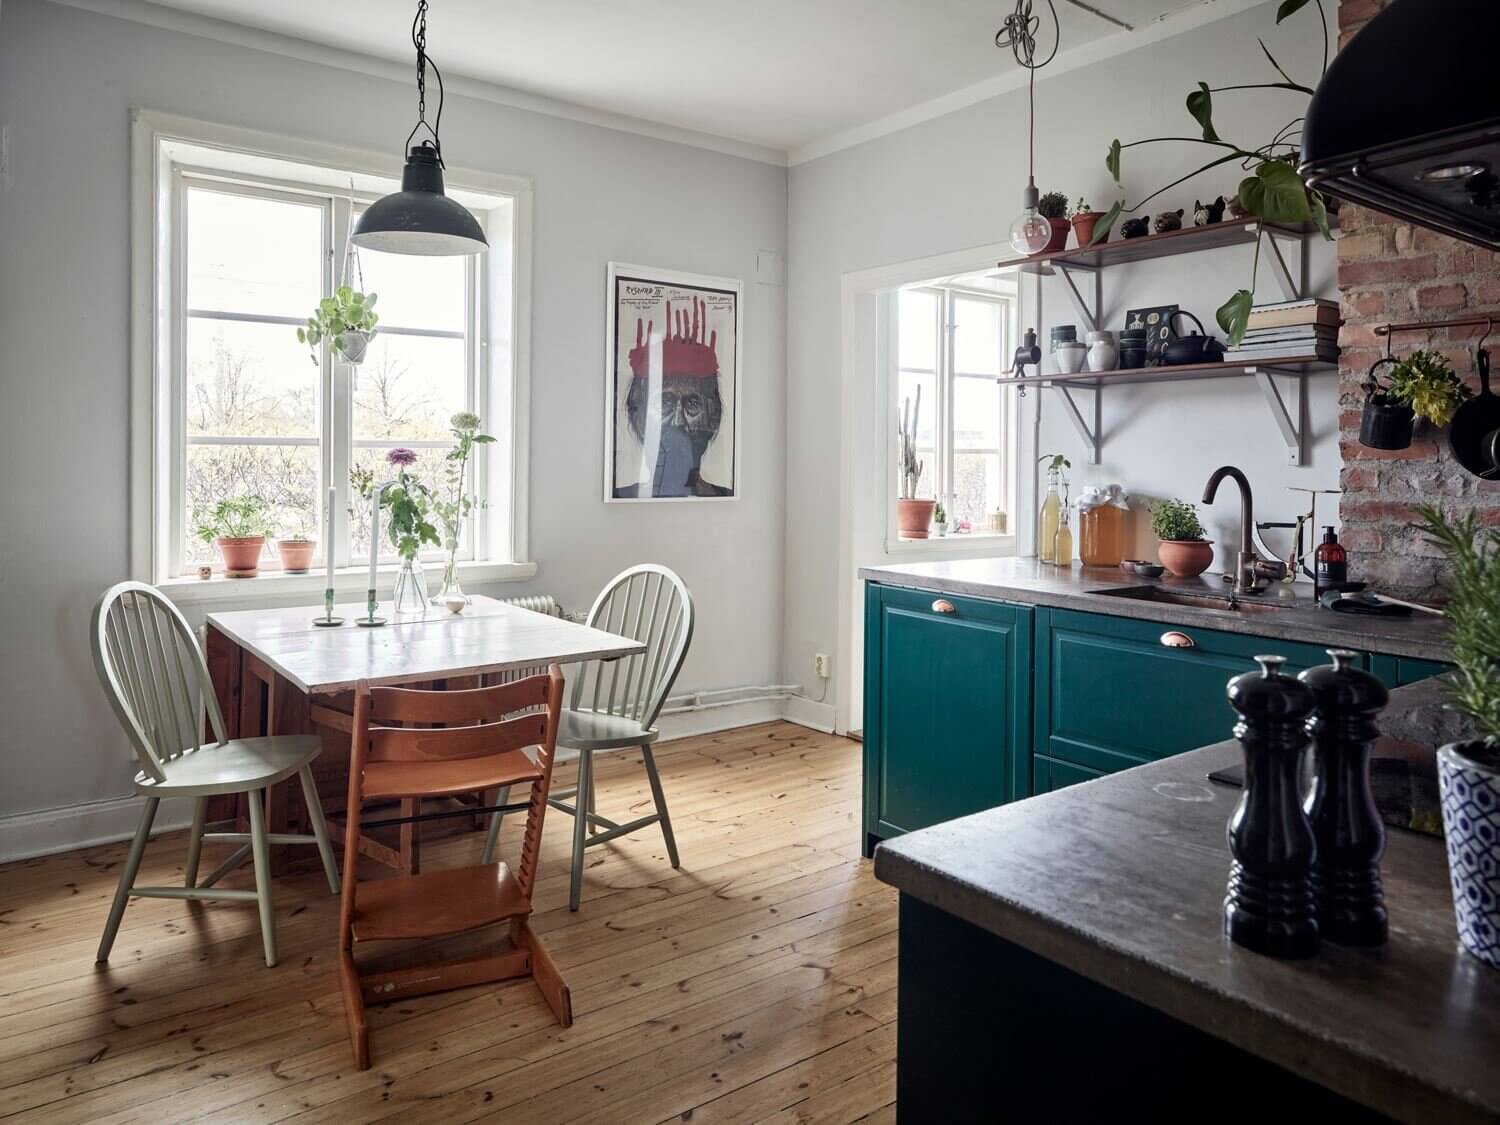 AGreenKitchenwithExposedBrickinaScandiApartment TheNordroom7 A Green Kitchen with Exposed Brick in a Scandi Apartment